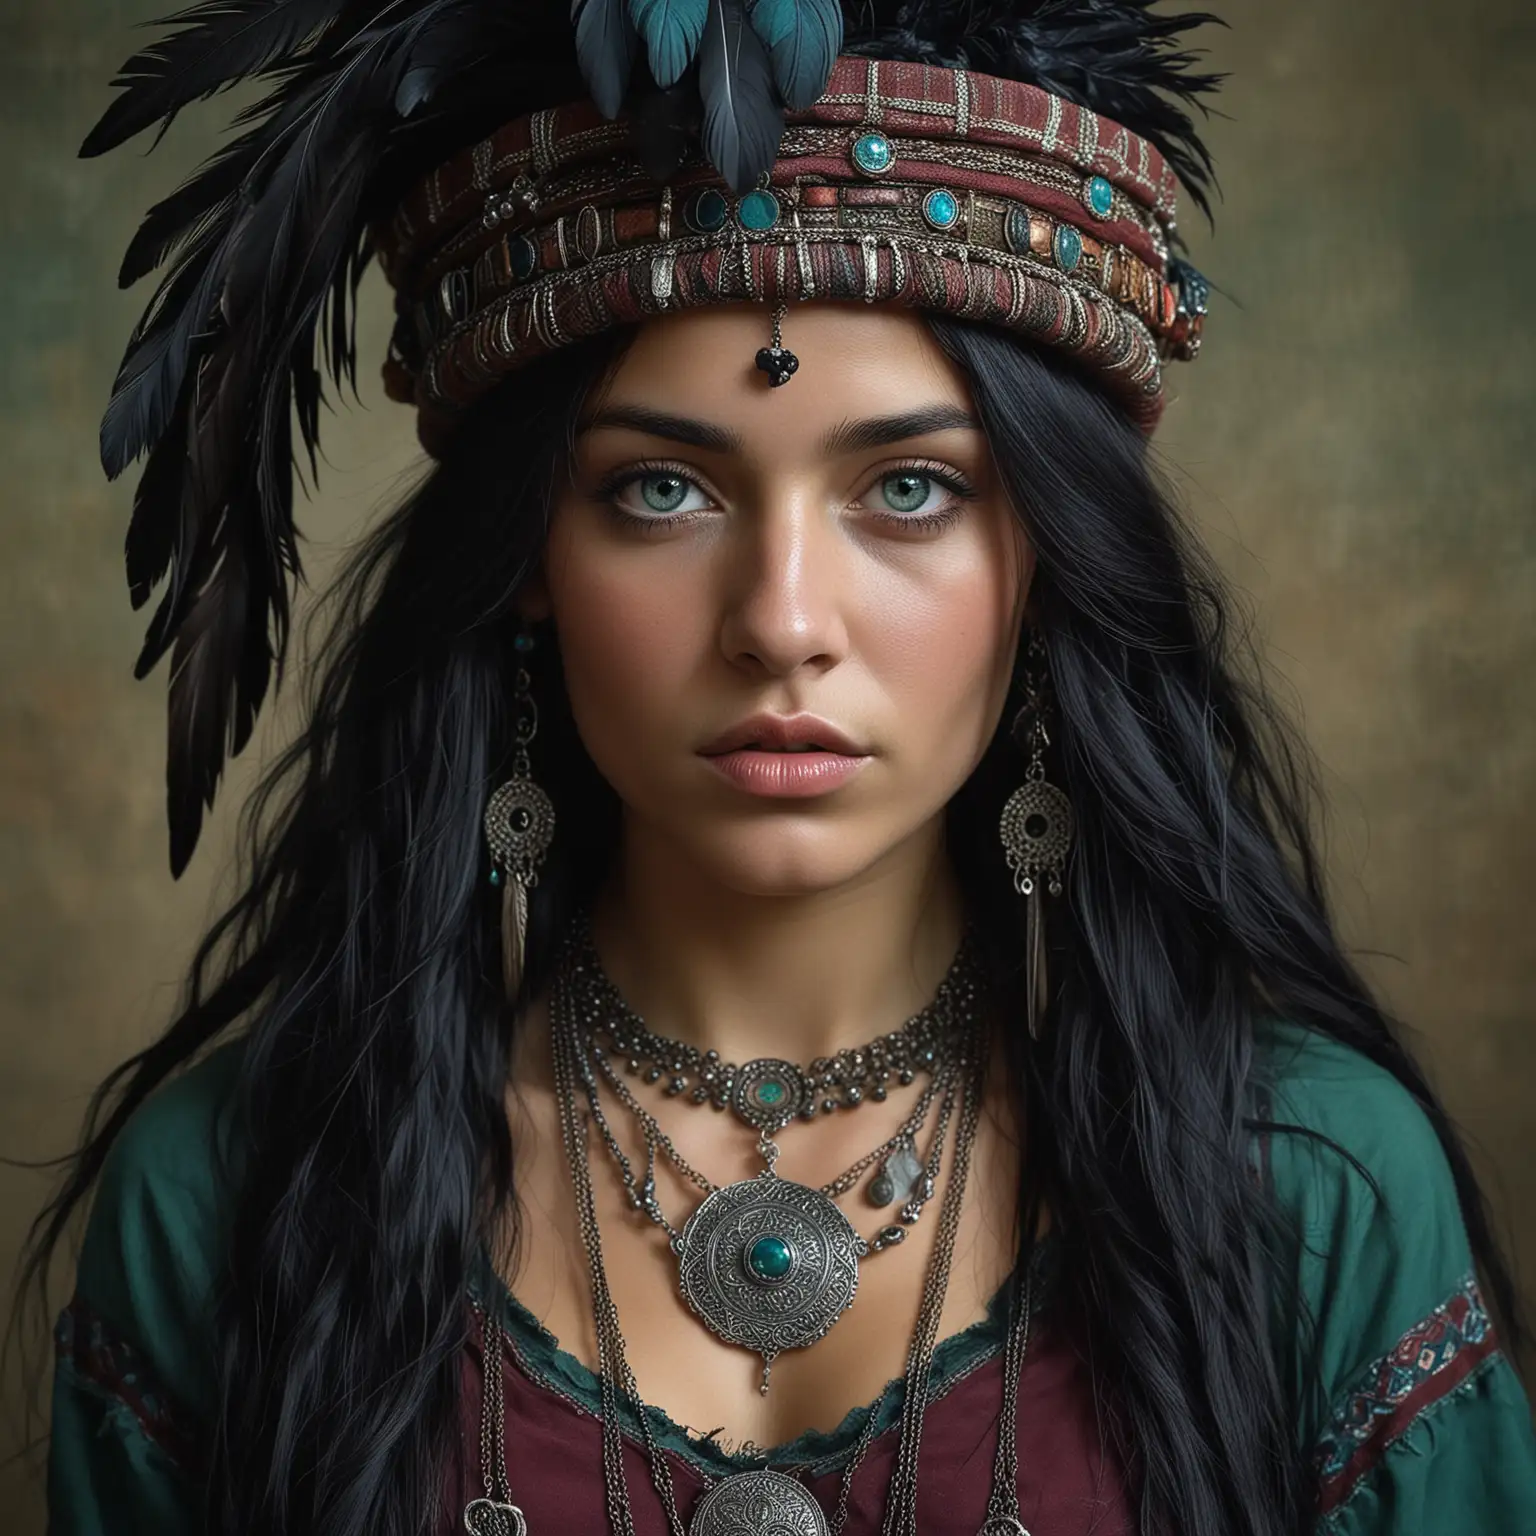 Romani girl called Eldra Roberts, a Proud Welsh gypsy, from the book Eldra with long black hair, piercing blue eyes, black crow feathers hat, dark green an burgundy clothes, celtic, necklaces,  a hyperrealistic painting inspired by lee jeffries, zbrush central contest winner, hyperrealism, steven mccurry portrait, photography alexey gurylev, alessio albi